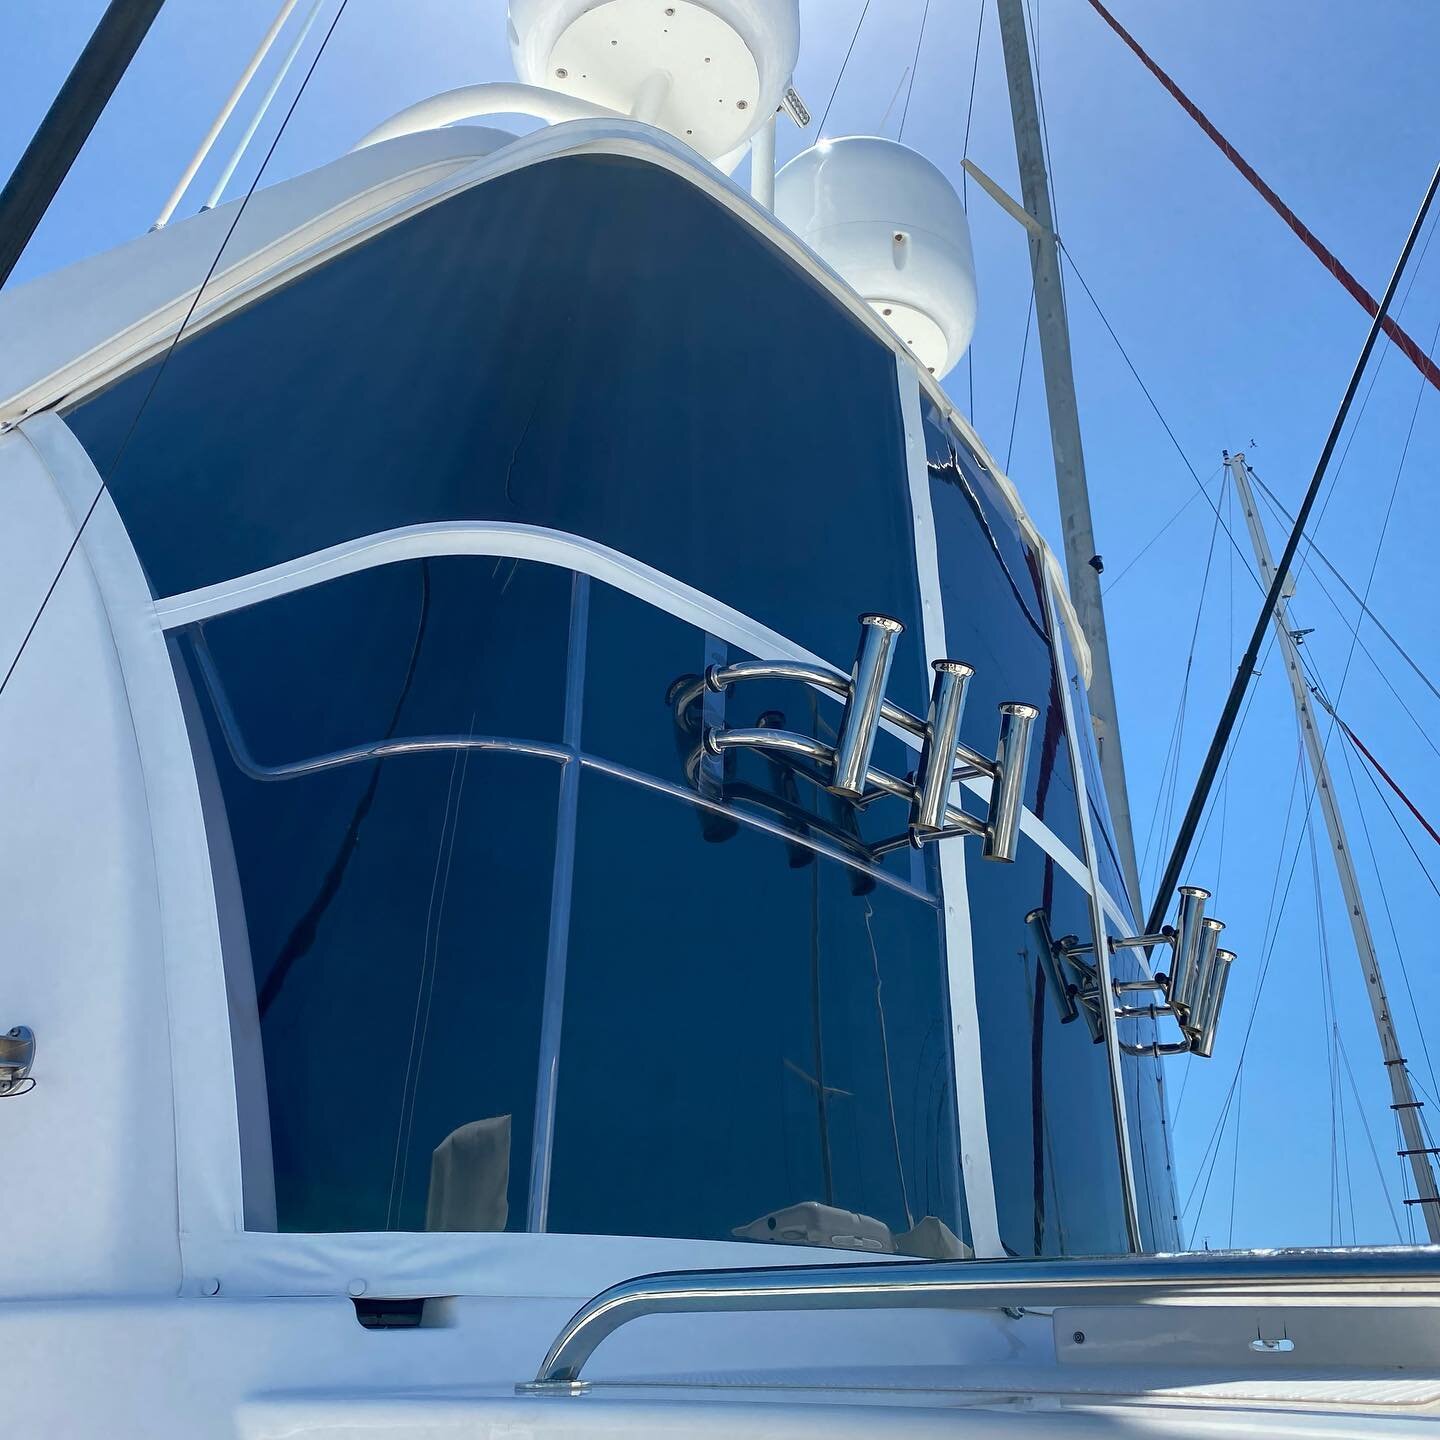 Recent project on a Riviera 56 enclosed Flybridge, Clears were designed with a removable centre door section to allow access to the newly installed fibreglass rear Canopy. With a new Serge Ferrari block-out roof and tinted Strataglass Clears it turne